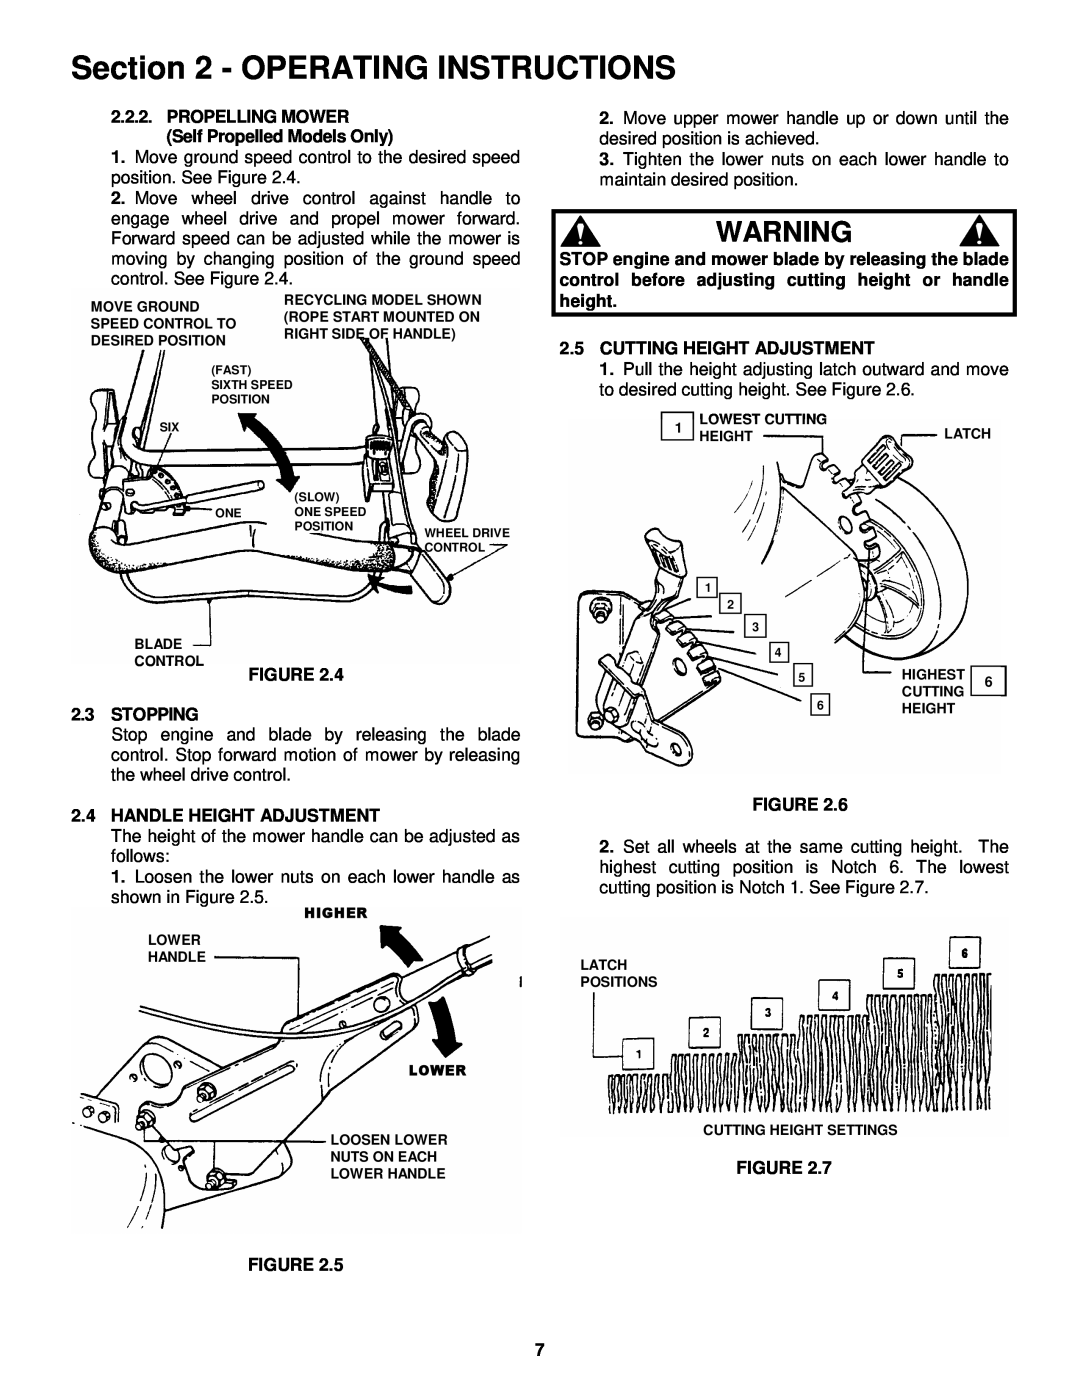 Snapper EFRP216516BV Operating Instructions, PROPELLING MOWER Self Propelled Models Only, Cutting Height Adjustment 